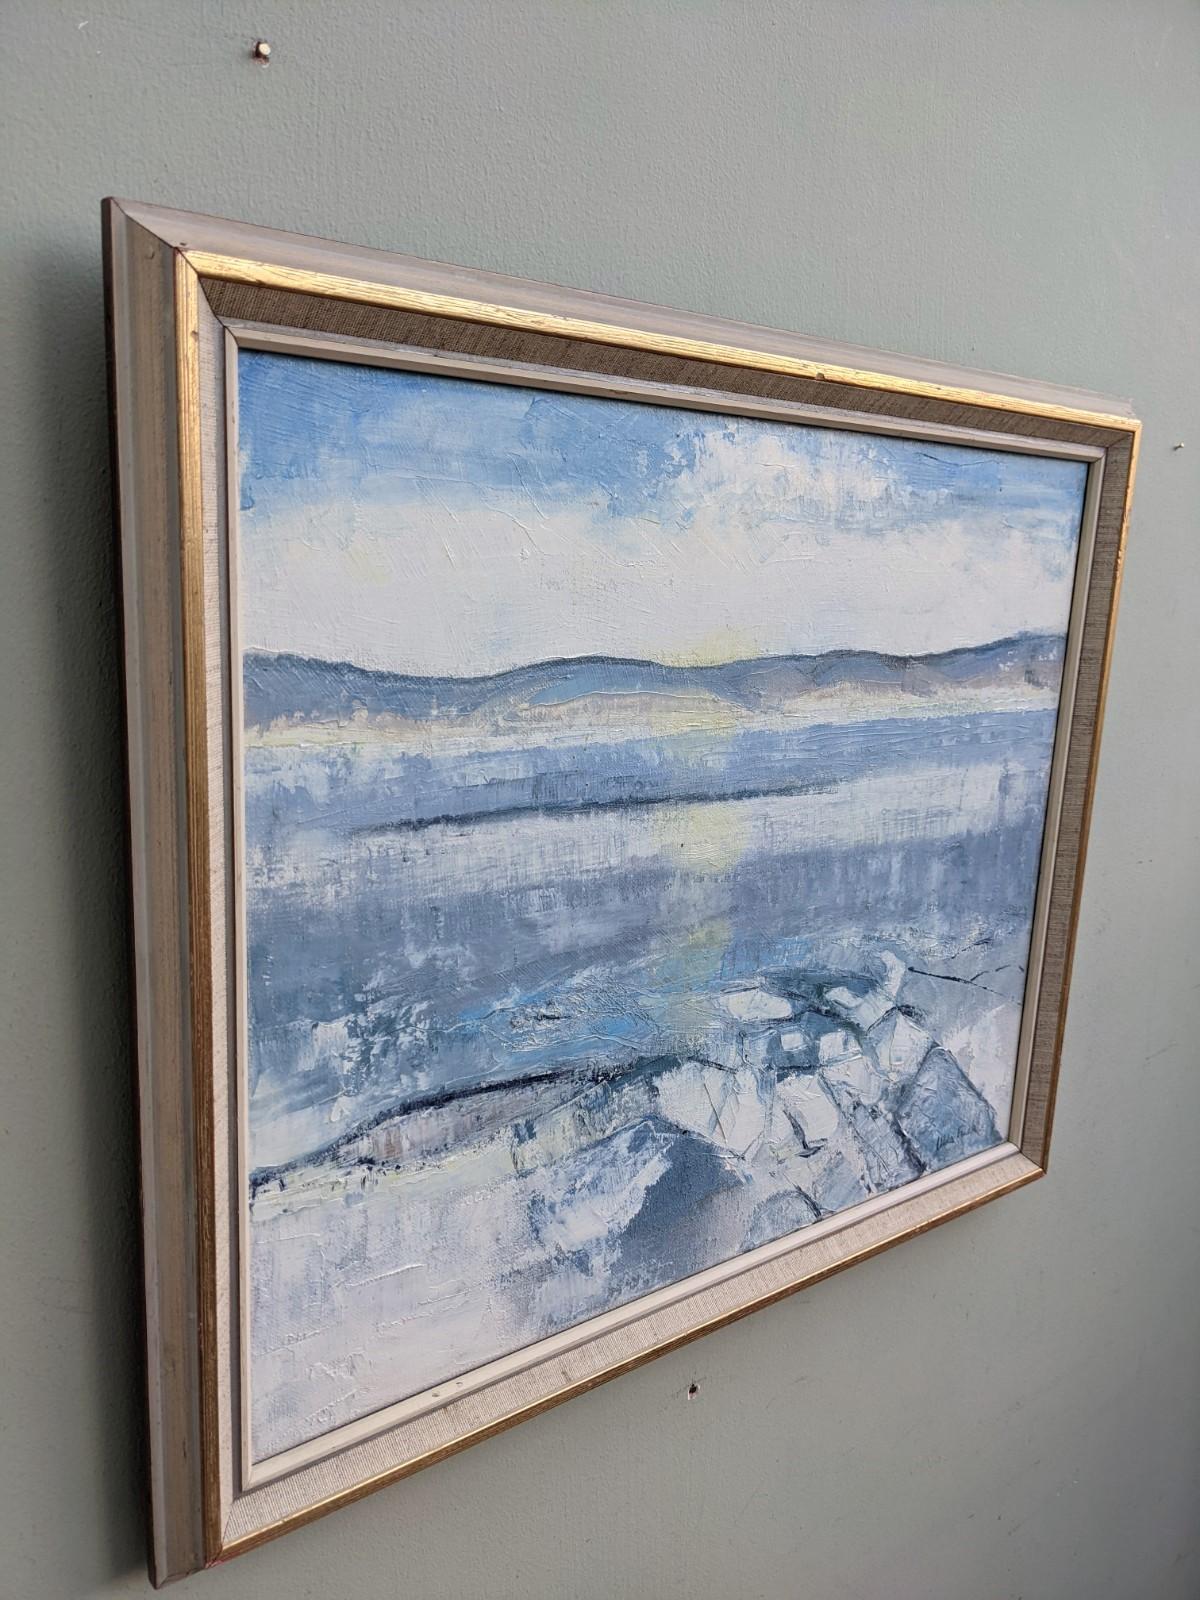 Icy Winter
Size: 44 x 52 cm (including frame)
Oil on canvas

A beautifully ethereal mid century modernist winter landscape scene, painted in oil onto canvas.

This semi abstract landscape features a pertinently restrained colour palette, with the